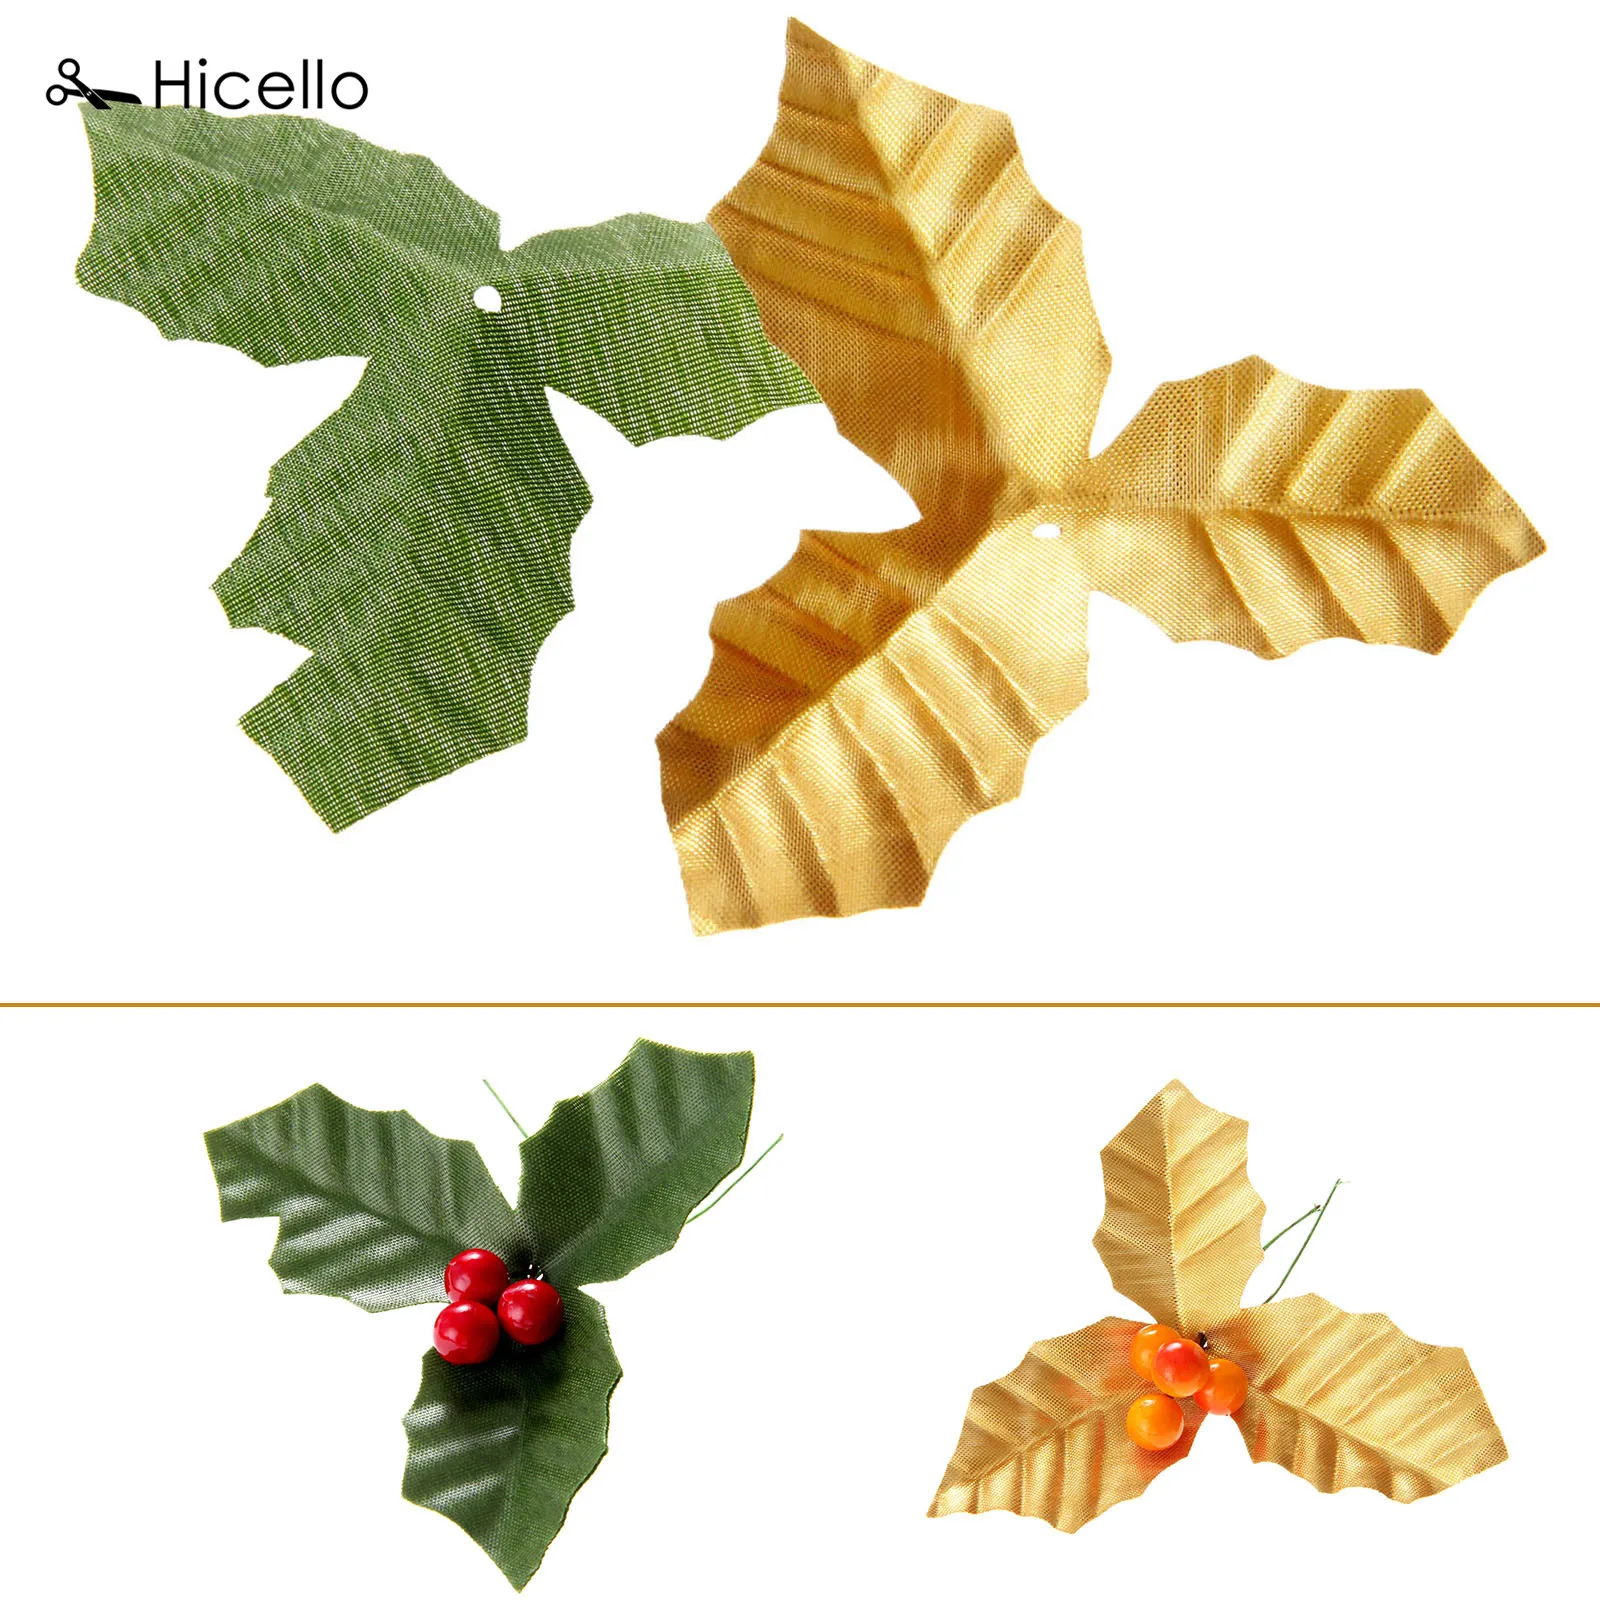 50pcs Artificial Leaves+50pcs Berries Decoration Craft DIY Green/Gold Leaf Red/Yellow Berry Wedding Home Holiday Party Supply